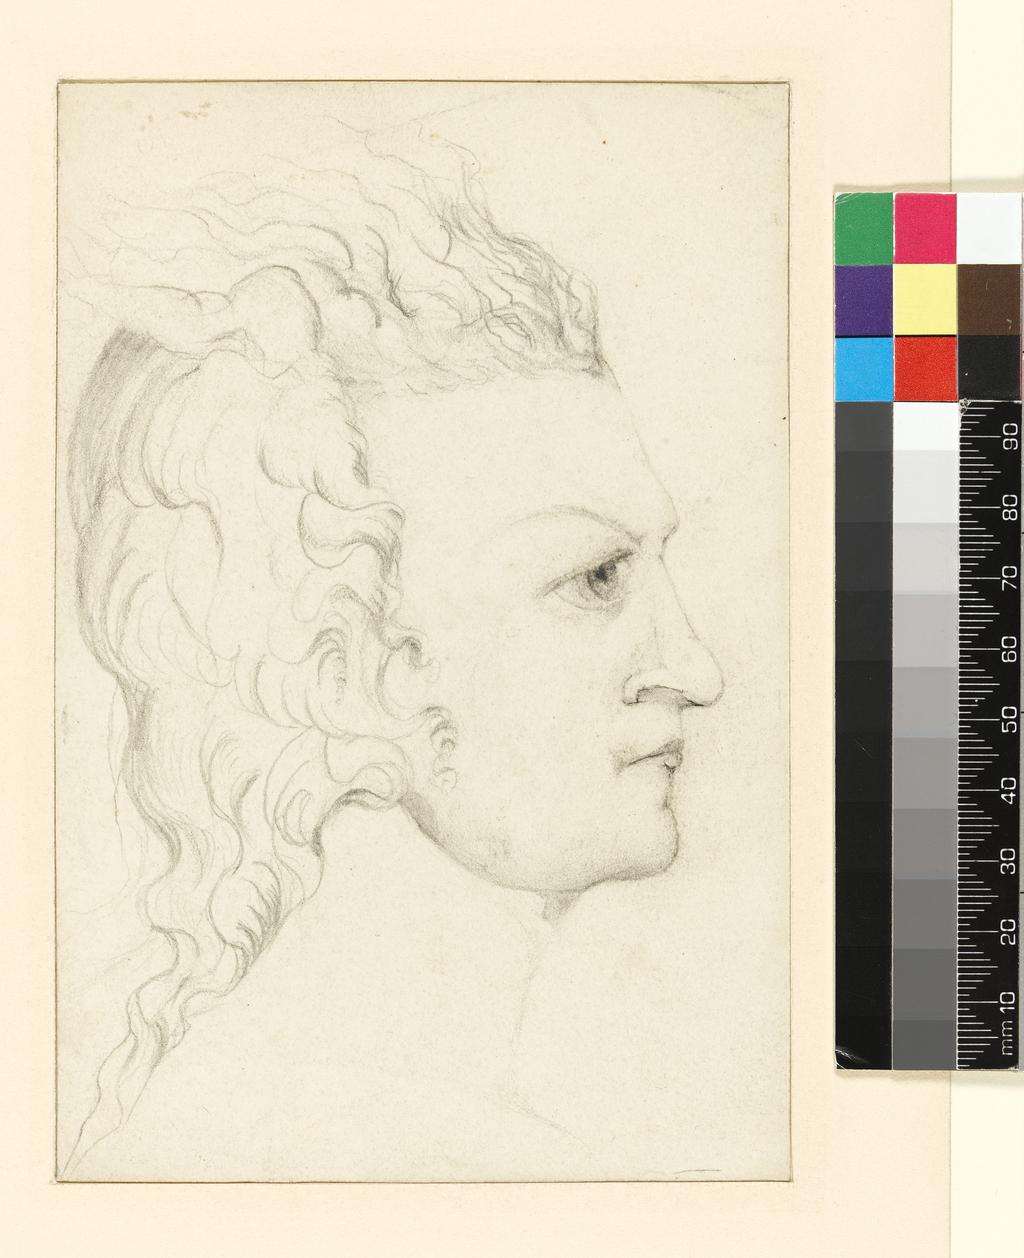 An image of Title/s: Portrait of the young William Blake Maker/s: Blake, Catherine (draughtsman) [ULAN info: British painter, 1762-1831] Technique Description: graphite on paper Dimensions: height: 155 mm, width: 104 mmDate: circa 1827 to 1831 